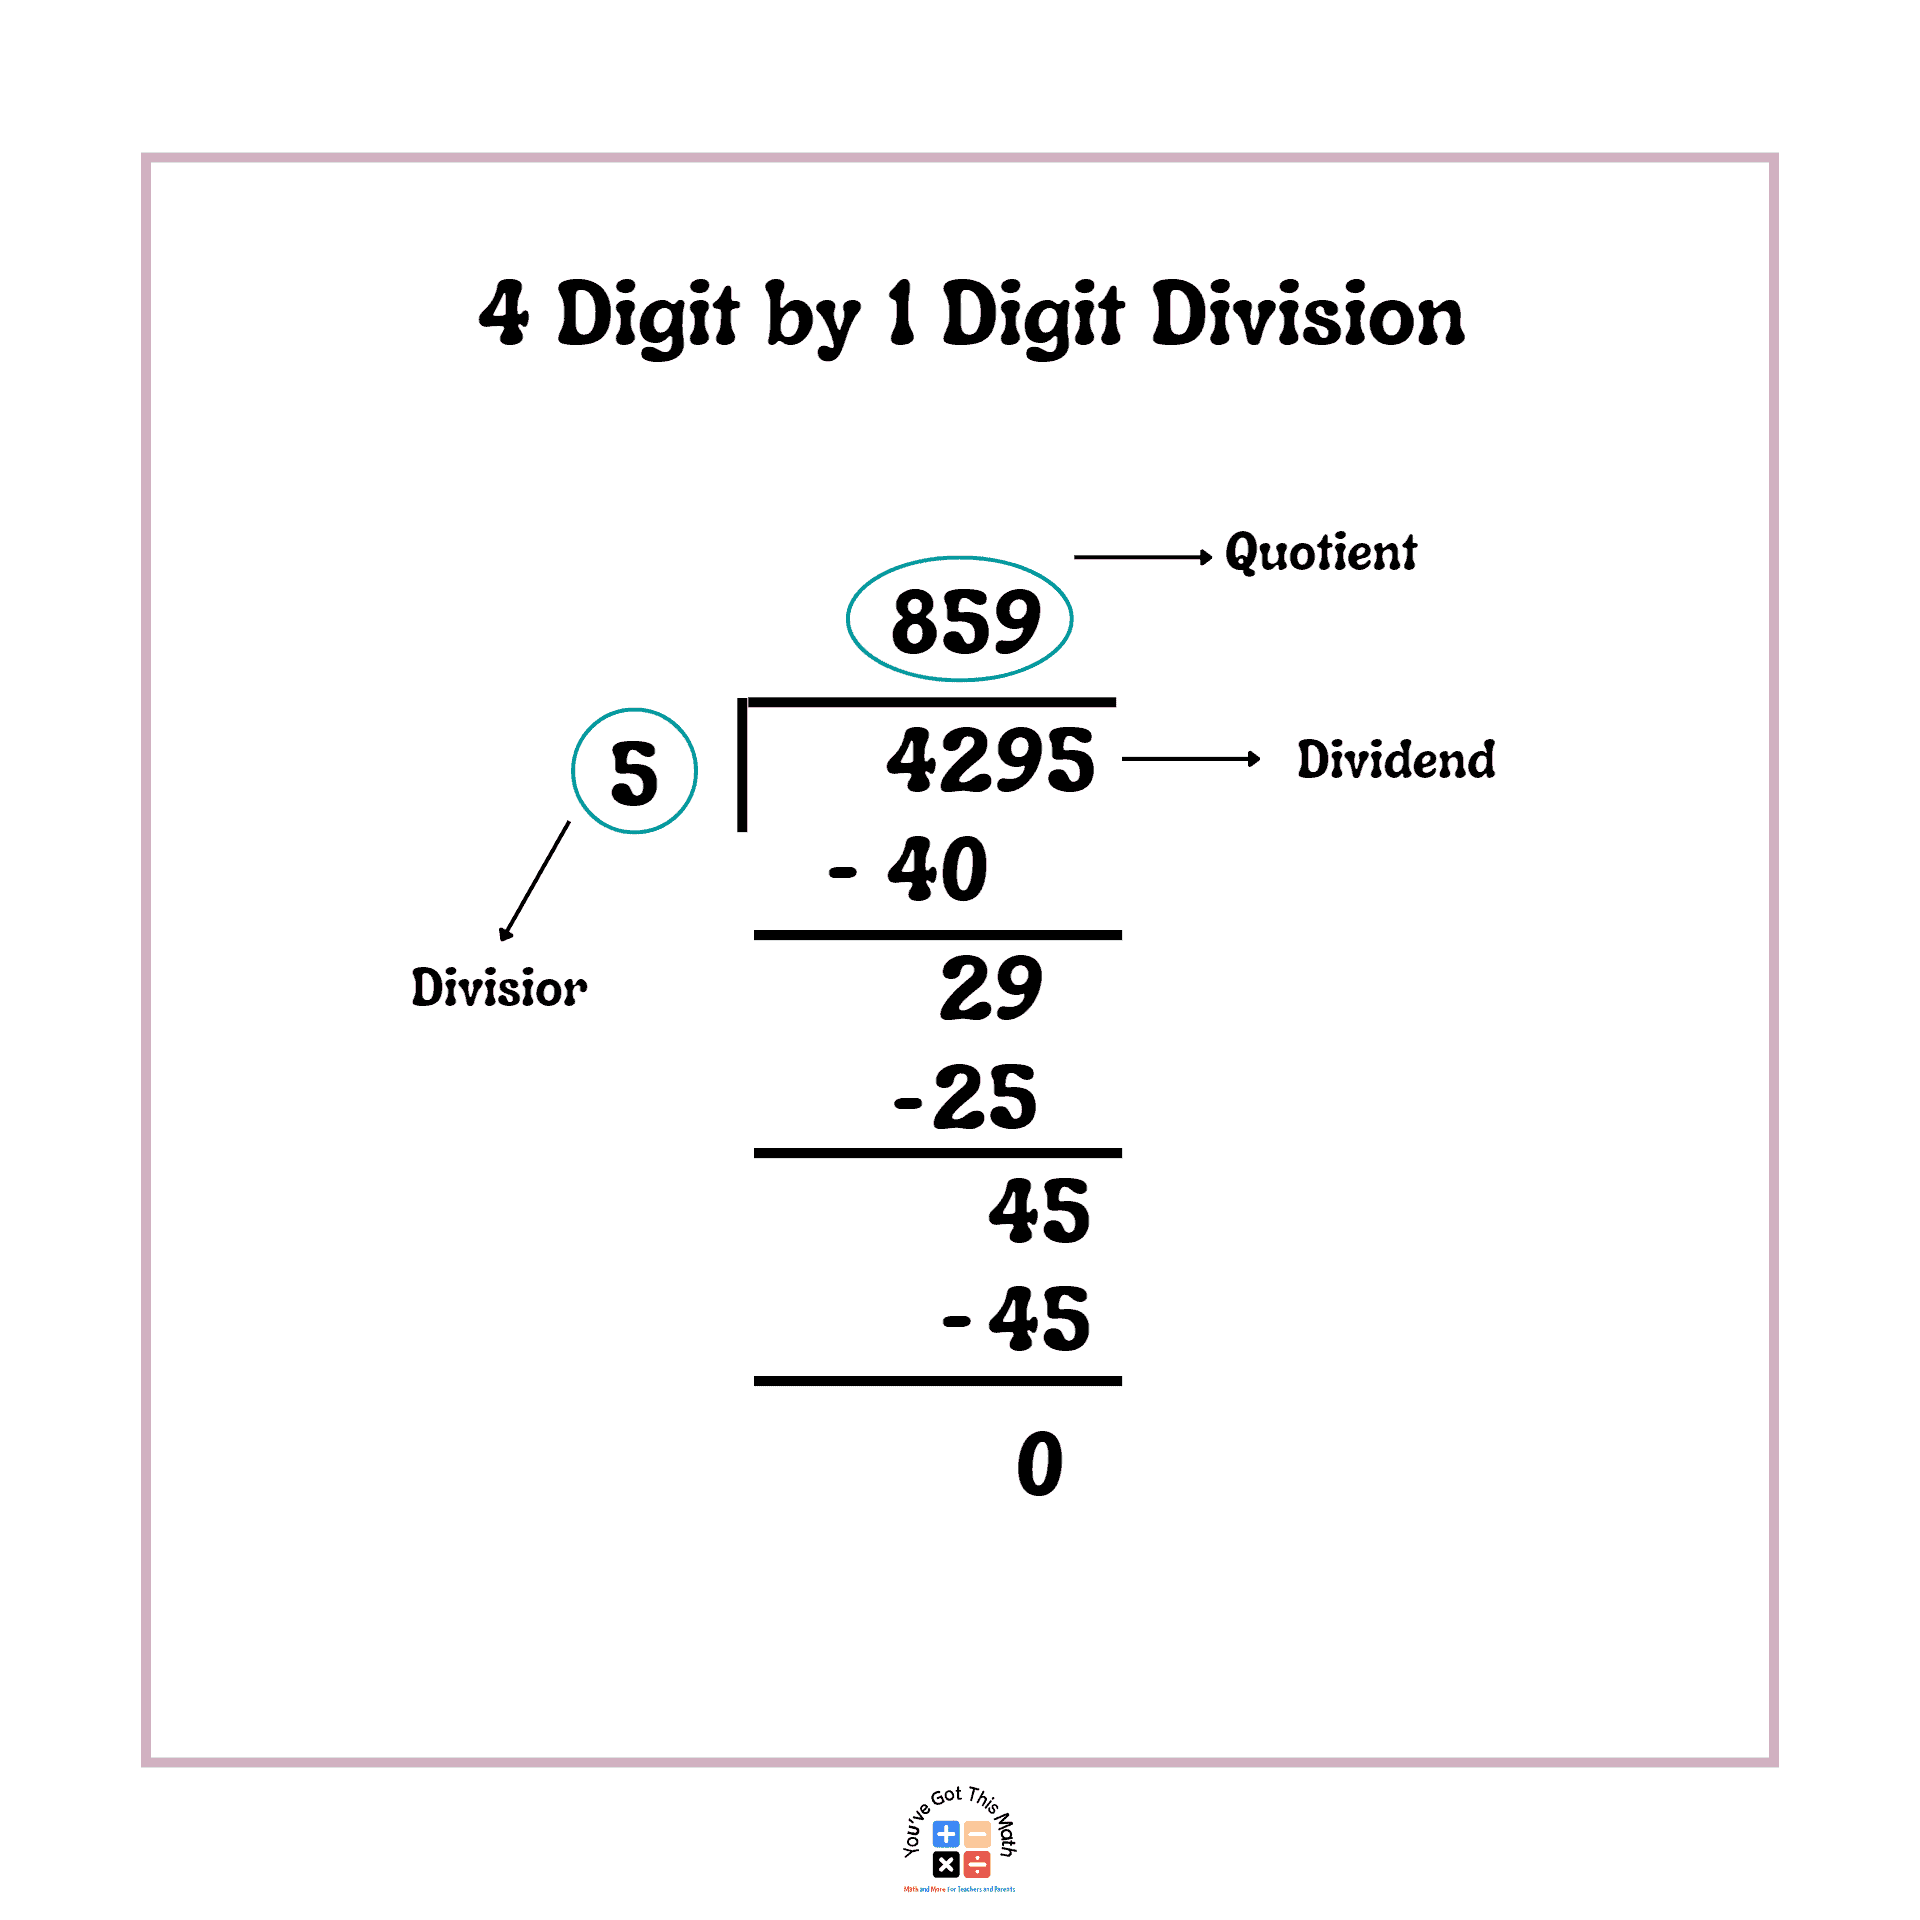 different parts of division in 4 digit by 1 digit division word problems.